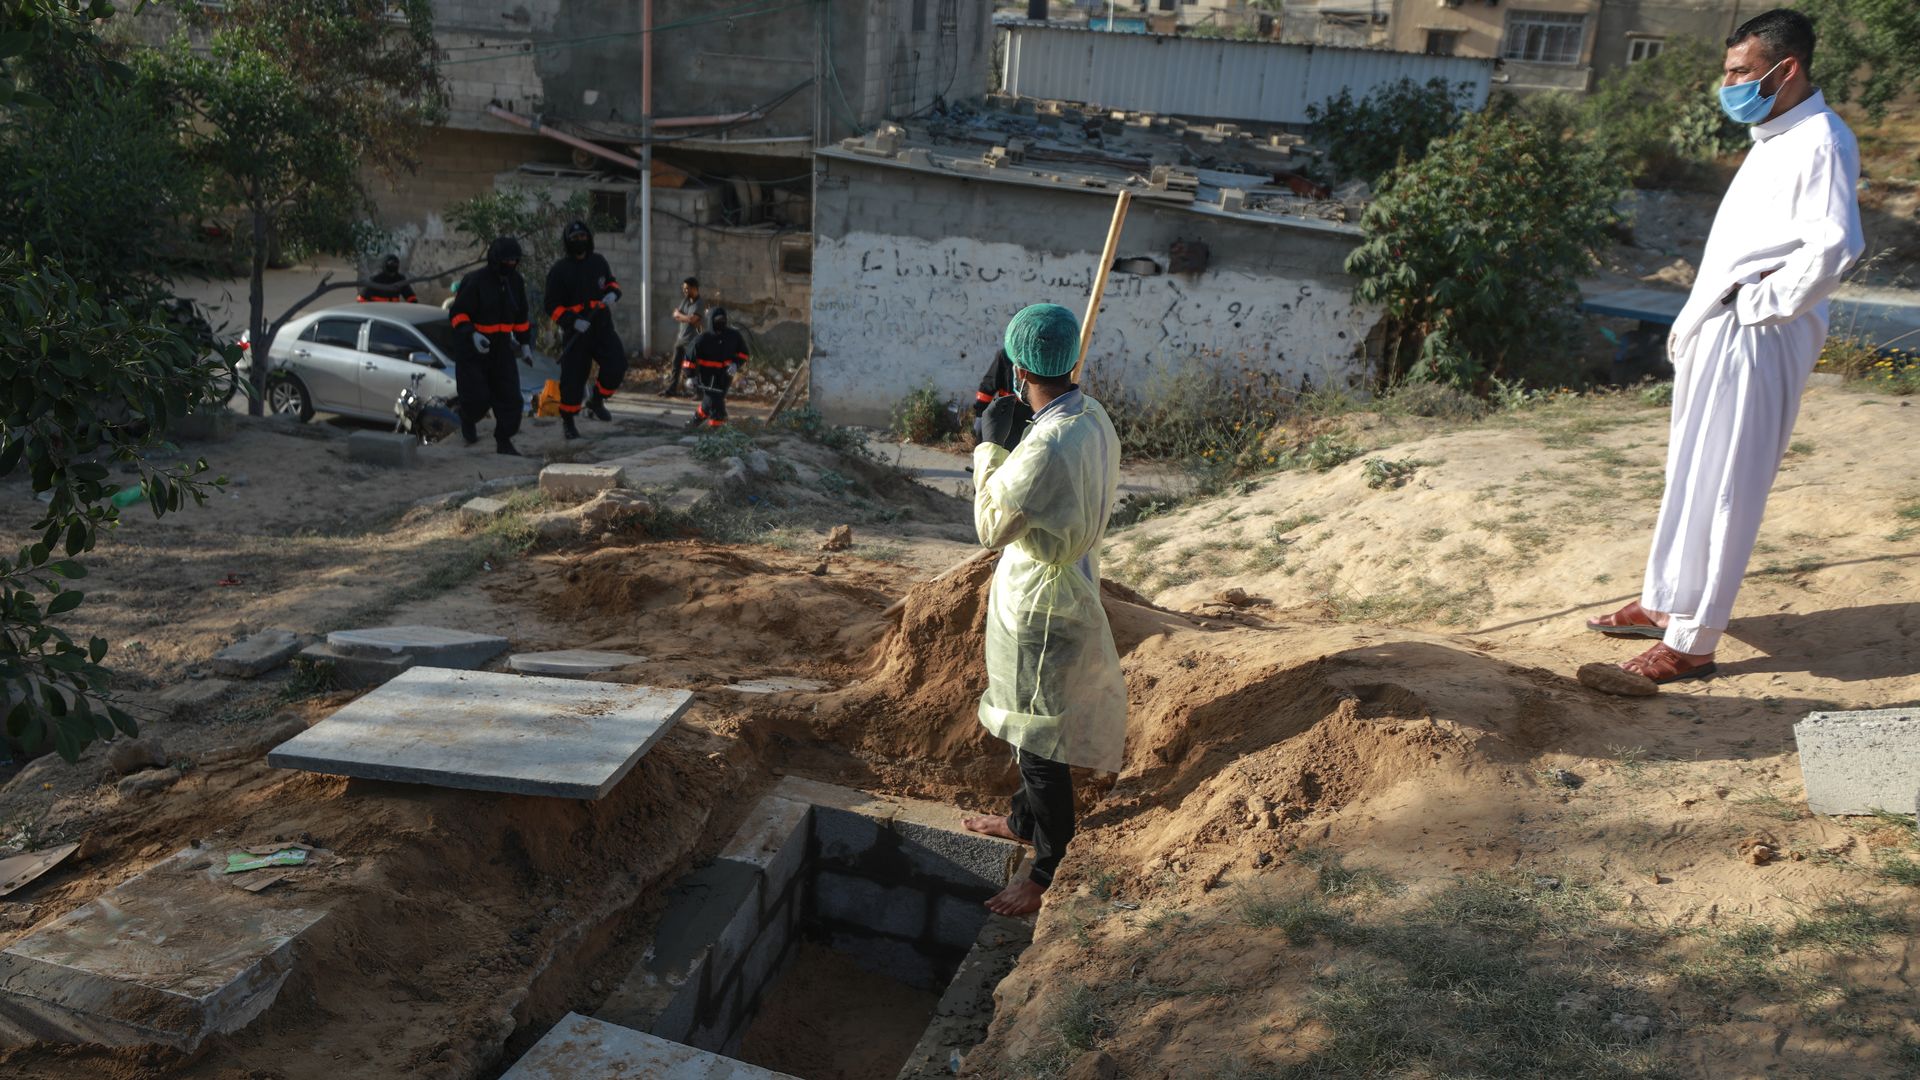 In this image, two men dig a grave